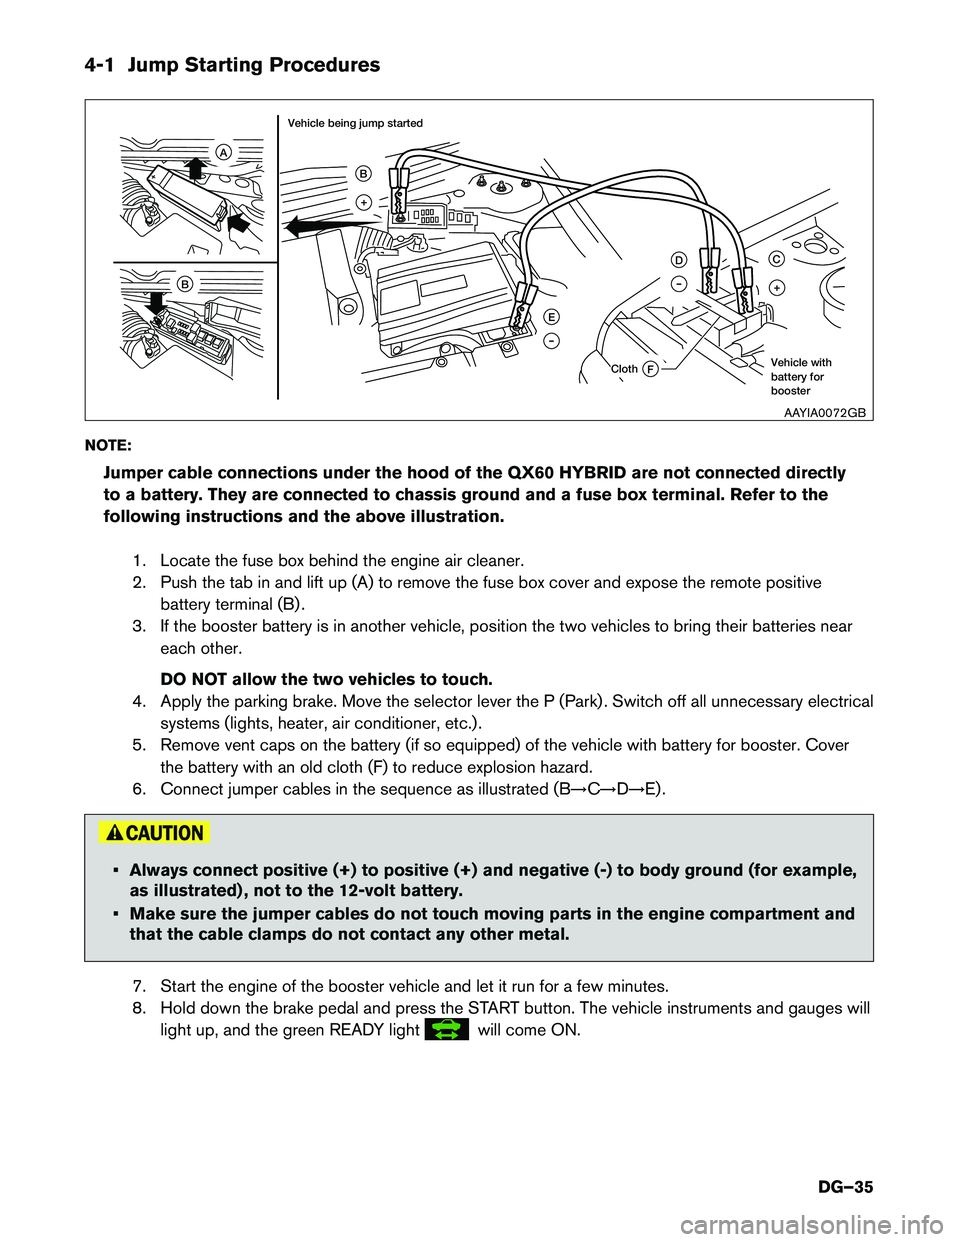 INFINITI QX60 HYBRID 2015  Dismantling Guide 4-1 Jump Starting Procedures 
NOTE:Jumper cable connections under the hood of the QX60 HYBRID are not connected directly 
to a battery. They are connected to chassis ground and a fuse box terminal. Re